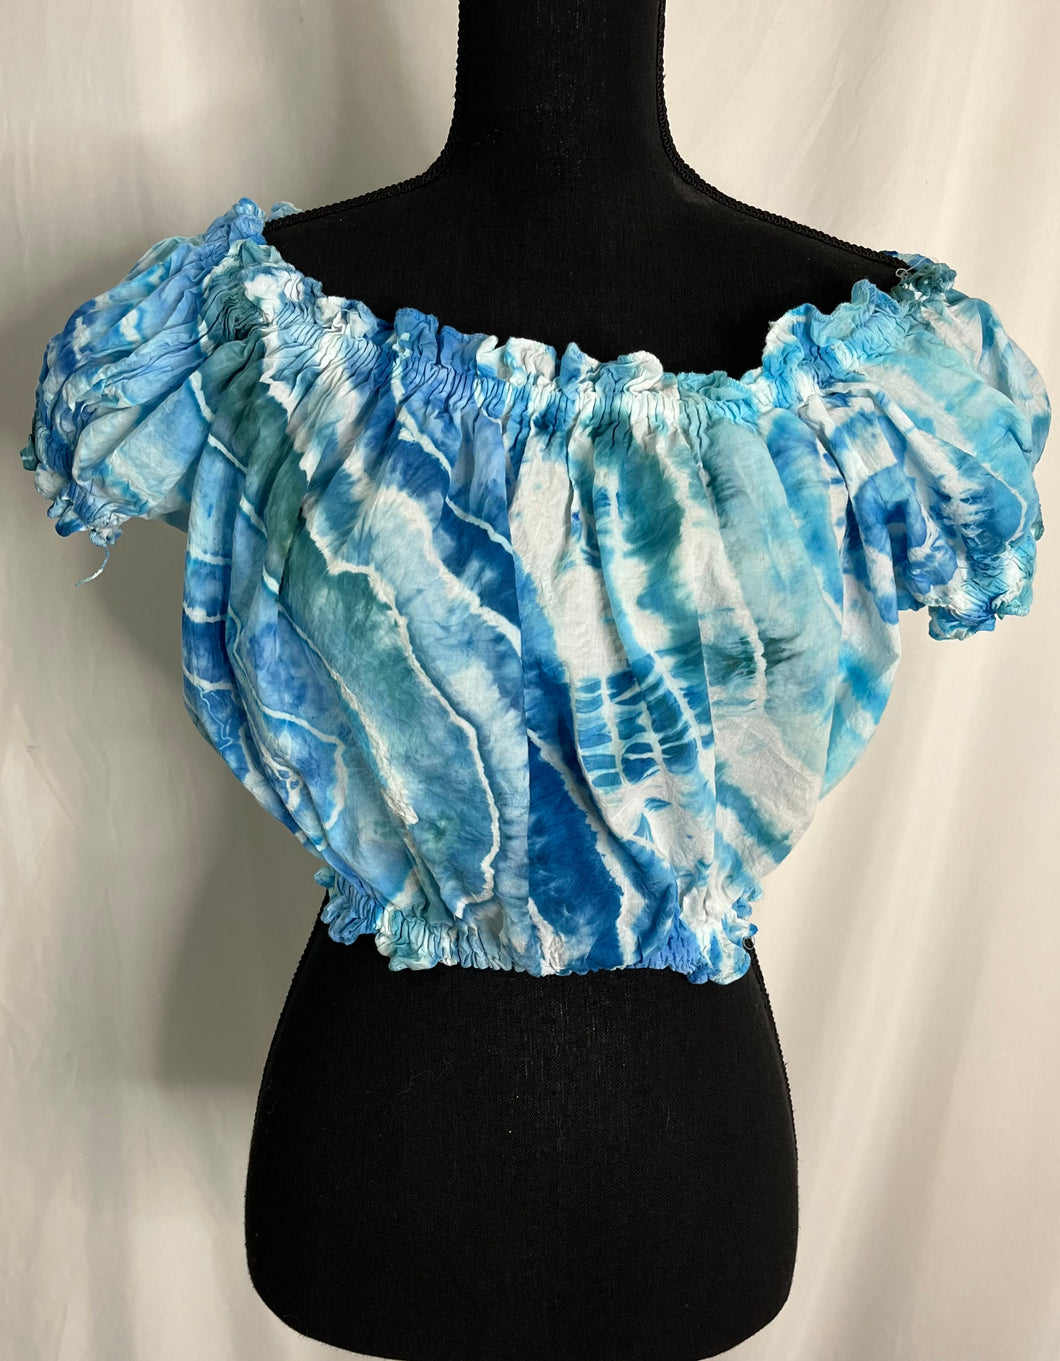 Beautiful Crop Top in Ocean Shades - fits small to xl - possibly 1xl